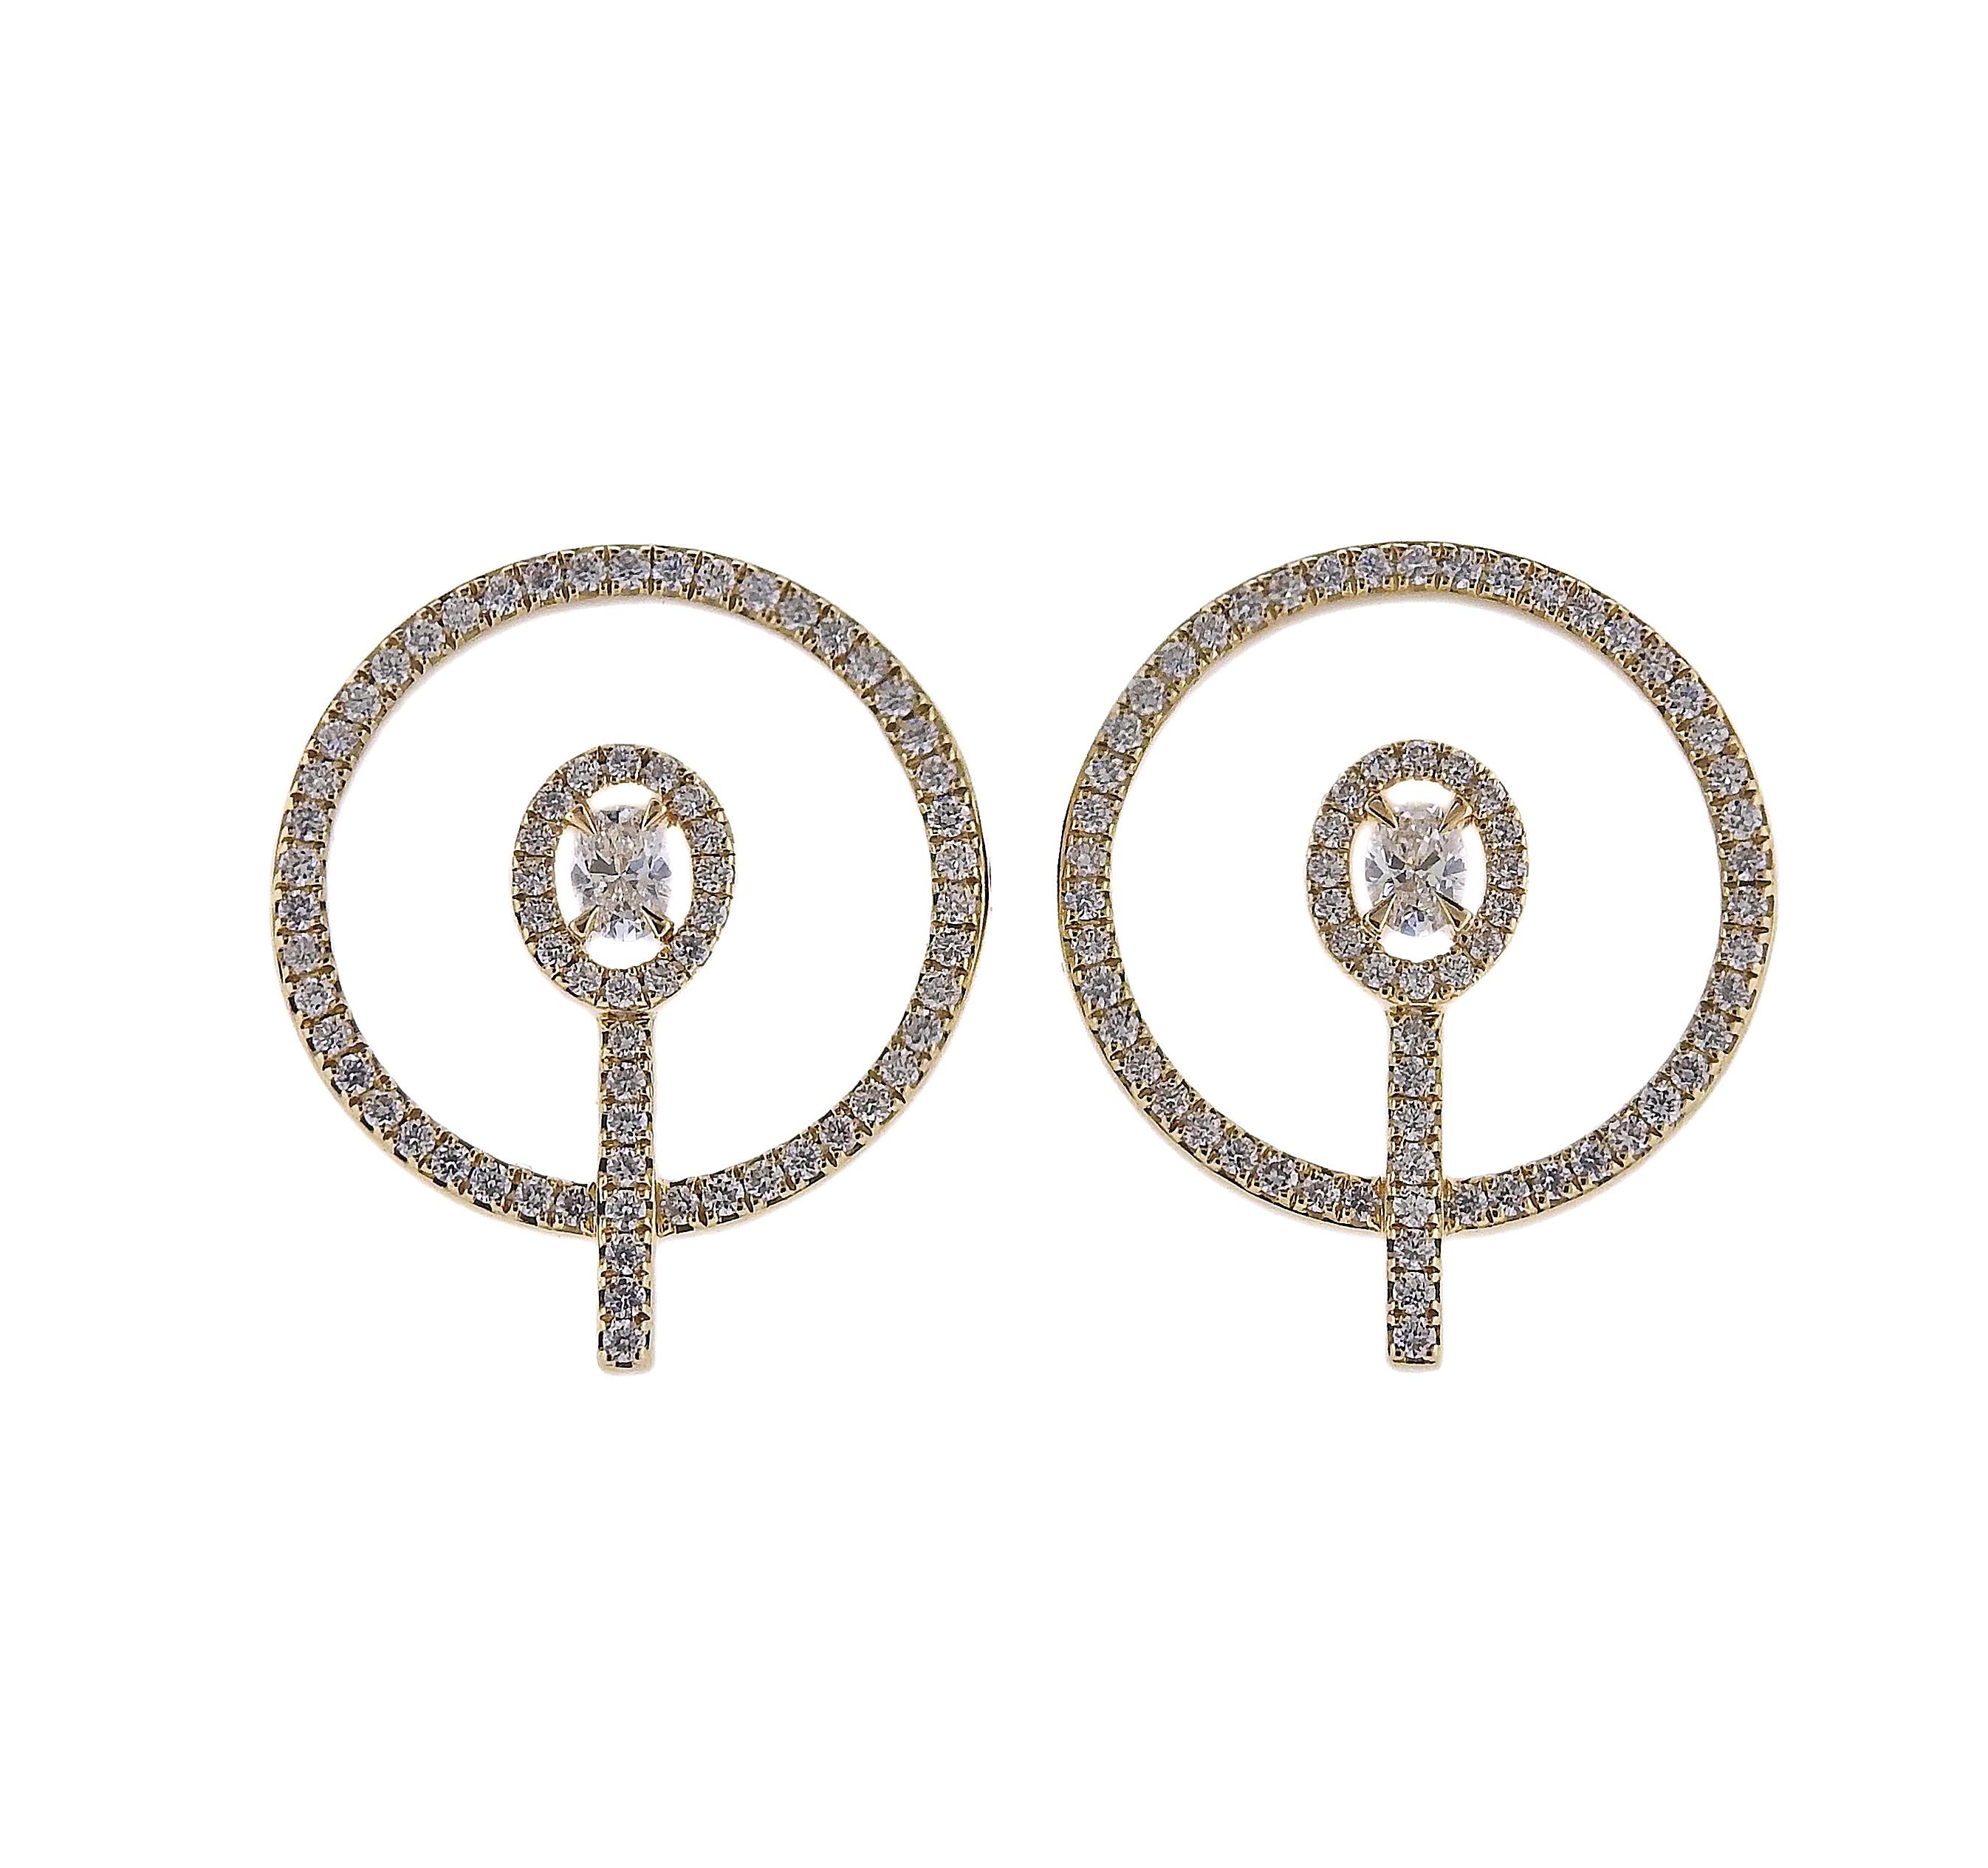 18k yellow gold Glam'Azone collection circle earrings by Messika, set with 0.84ctw G/VS diamonds. Earrings are 18mm in diameter. Marked: Messika,750, A45437. Weight is 6.8 grams. Retail Value $6,100. Store sample, box.